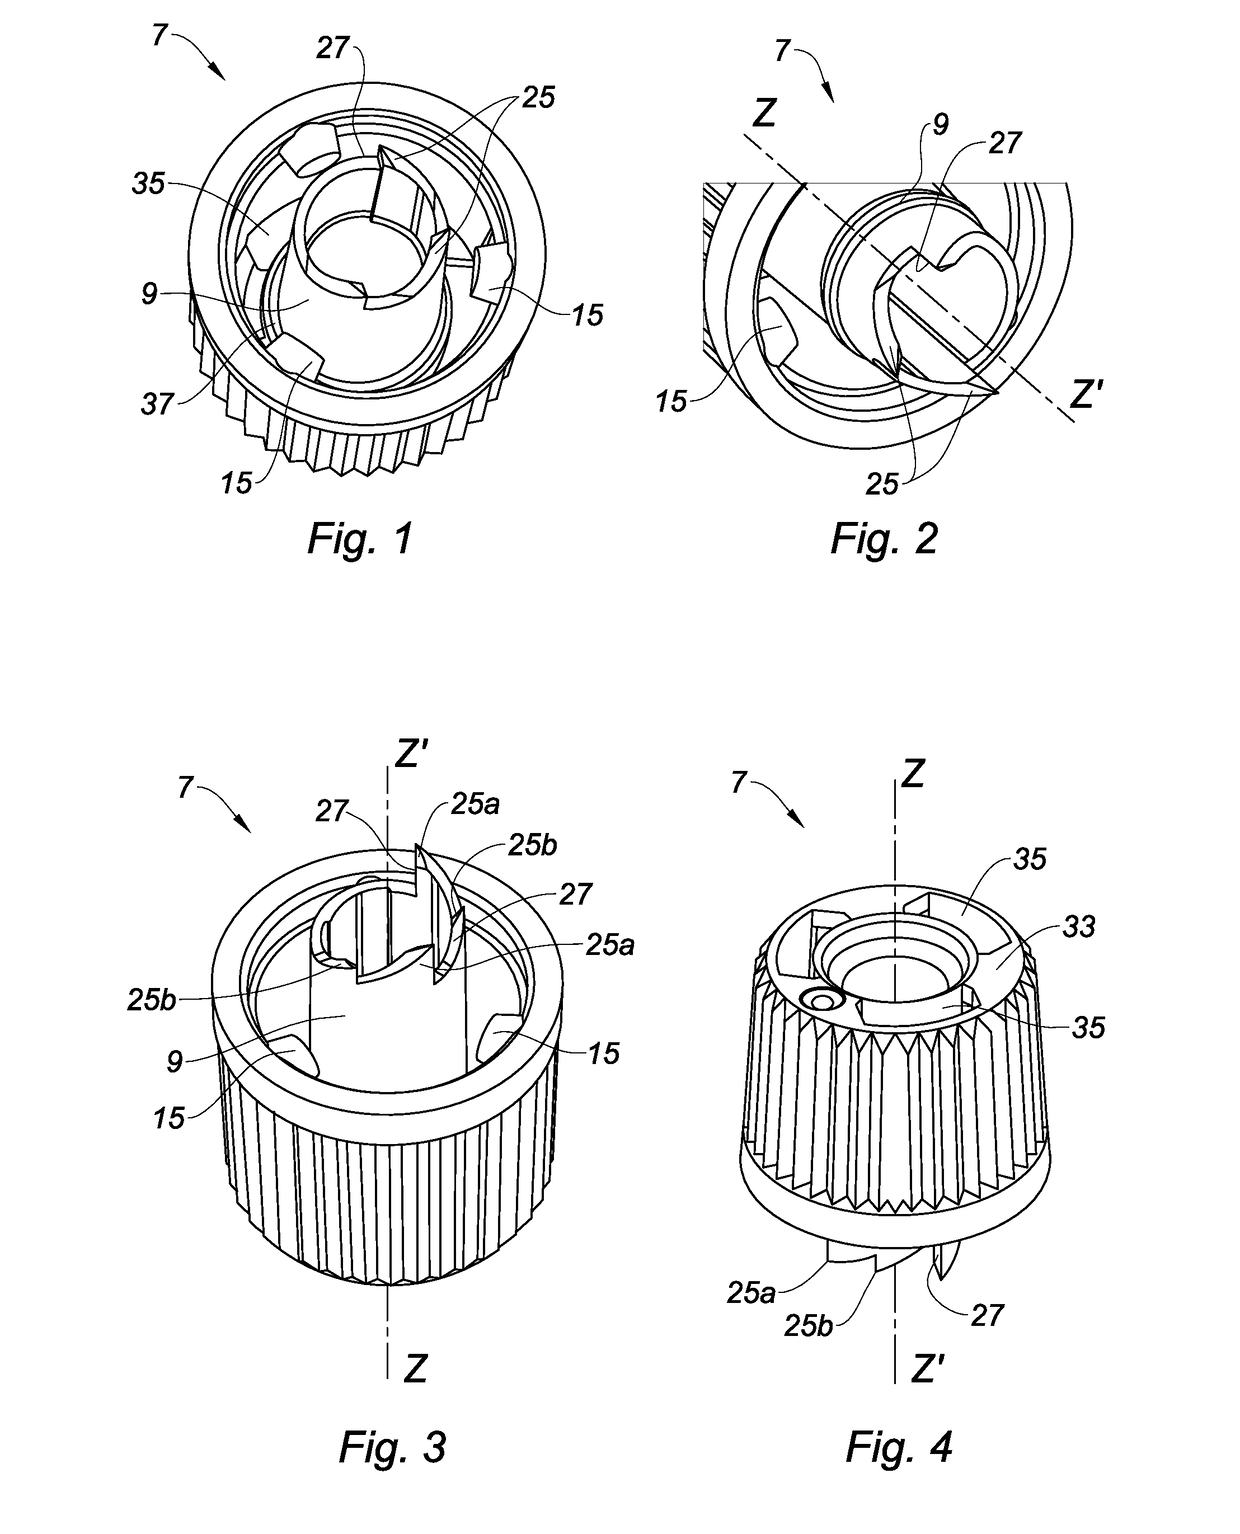 Perforating cap for a flexible tube